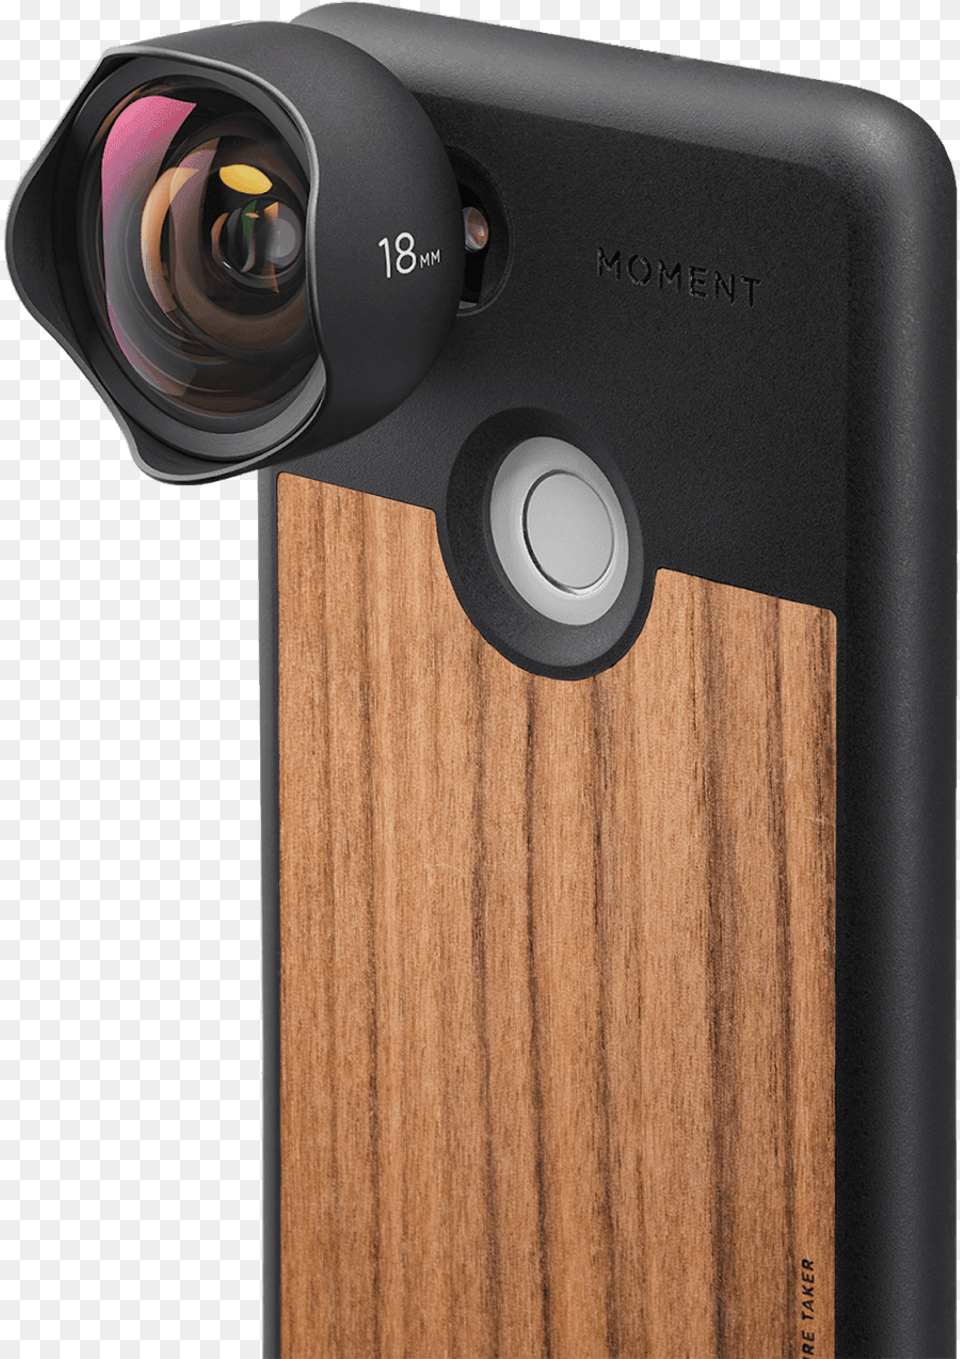 Smartphone Camera With A Moment Lens Mobile Phone, Electronics, Video Camera Free Transparent Png